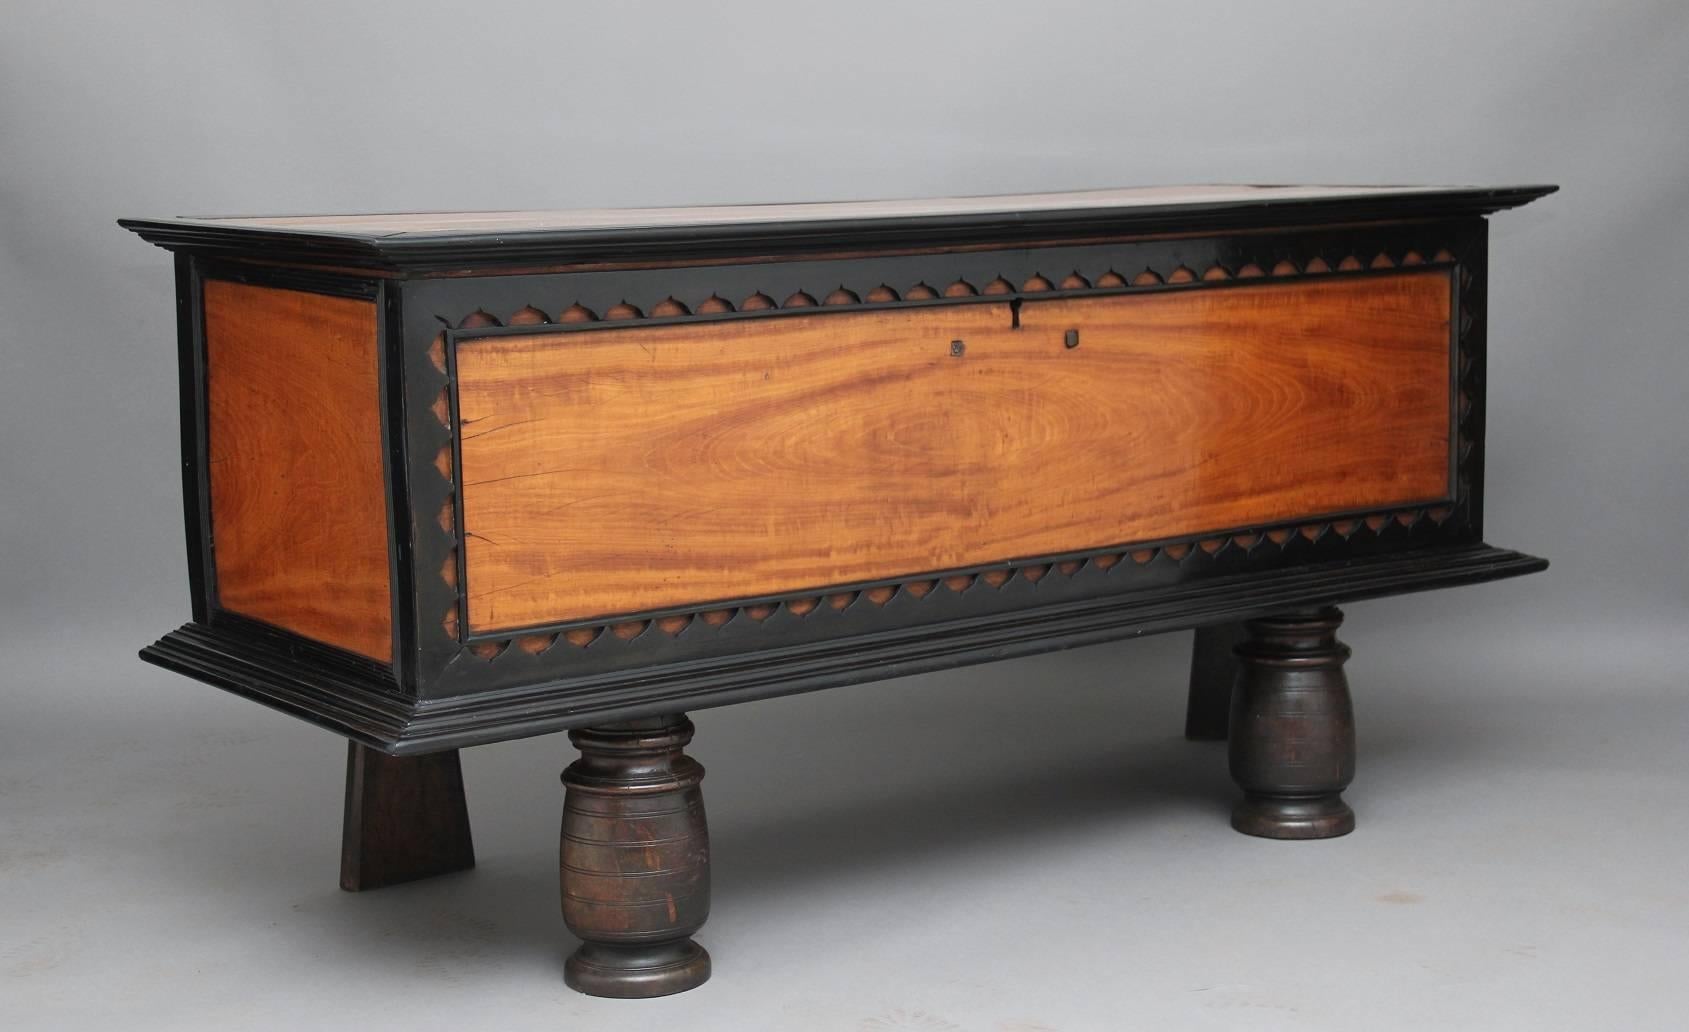 A large 18th century Ceylonese satinwood and ebony coffer / trunk, the hinged top opening to reveal a smaller lidded compartment, the front and sides of the trunk decorated with an outline of a delicate scalloped design, with the trunk sitting on